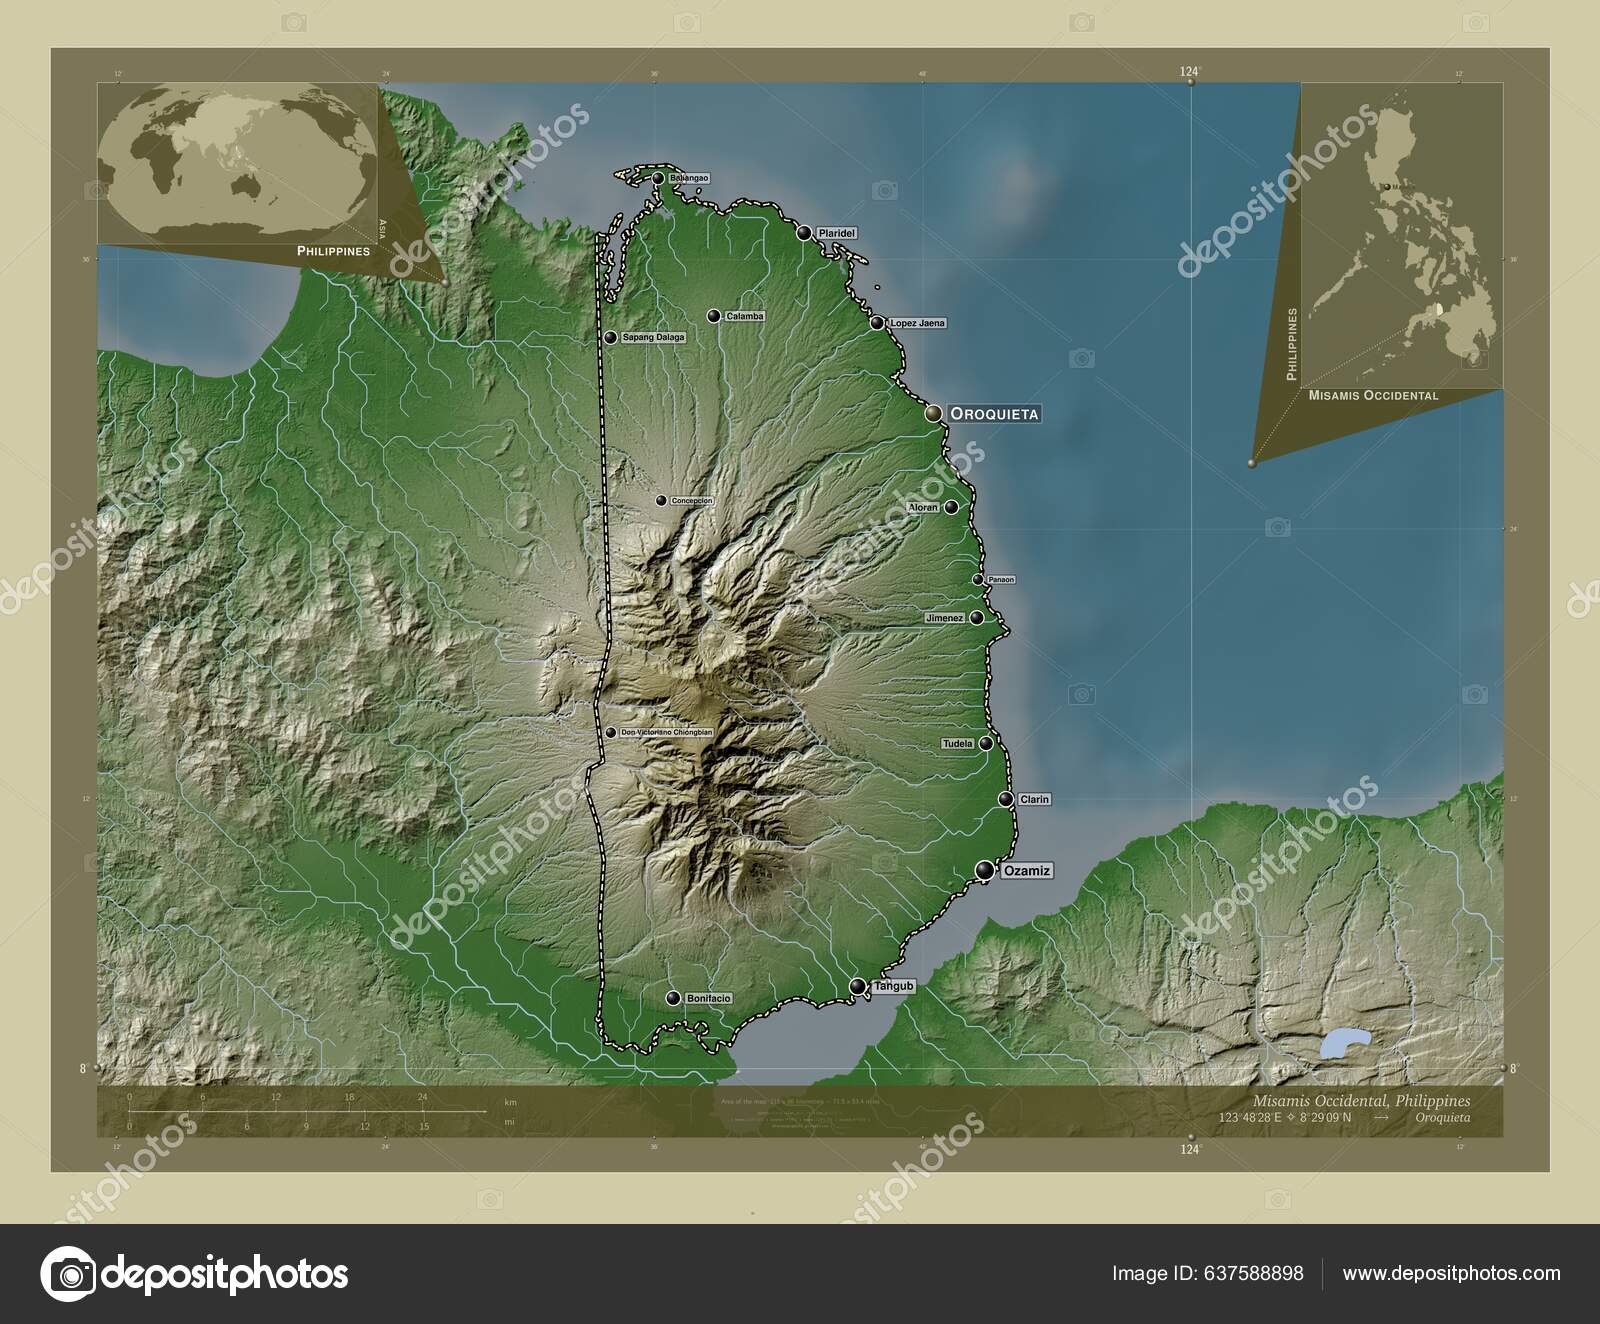 Misamis Occidental Province Philippines Elevation Map Colored Wiki Style  Lakes Stock Photo by ©Yarr65 637588898